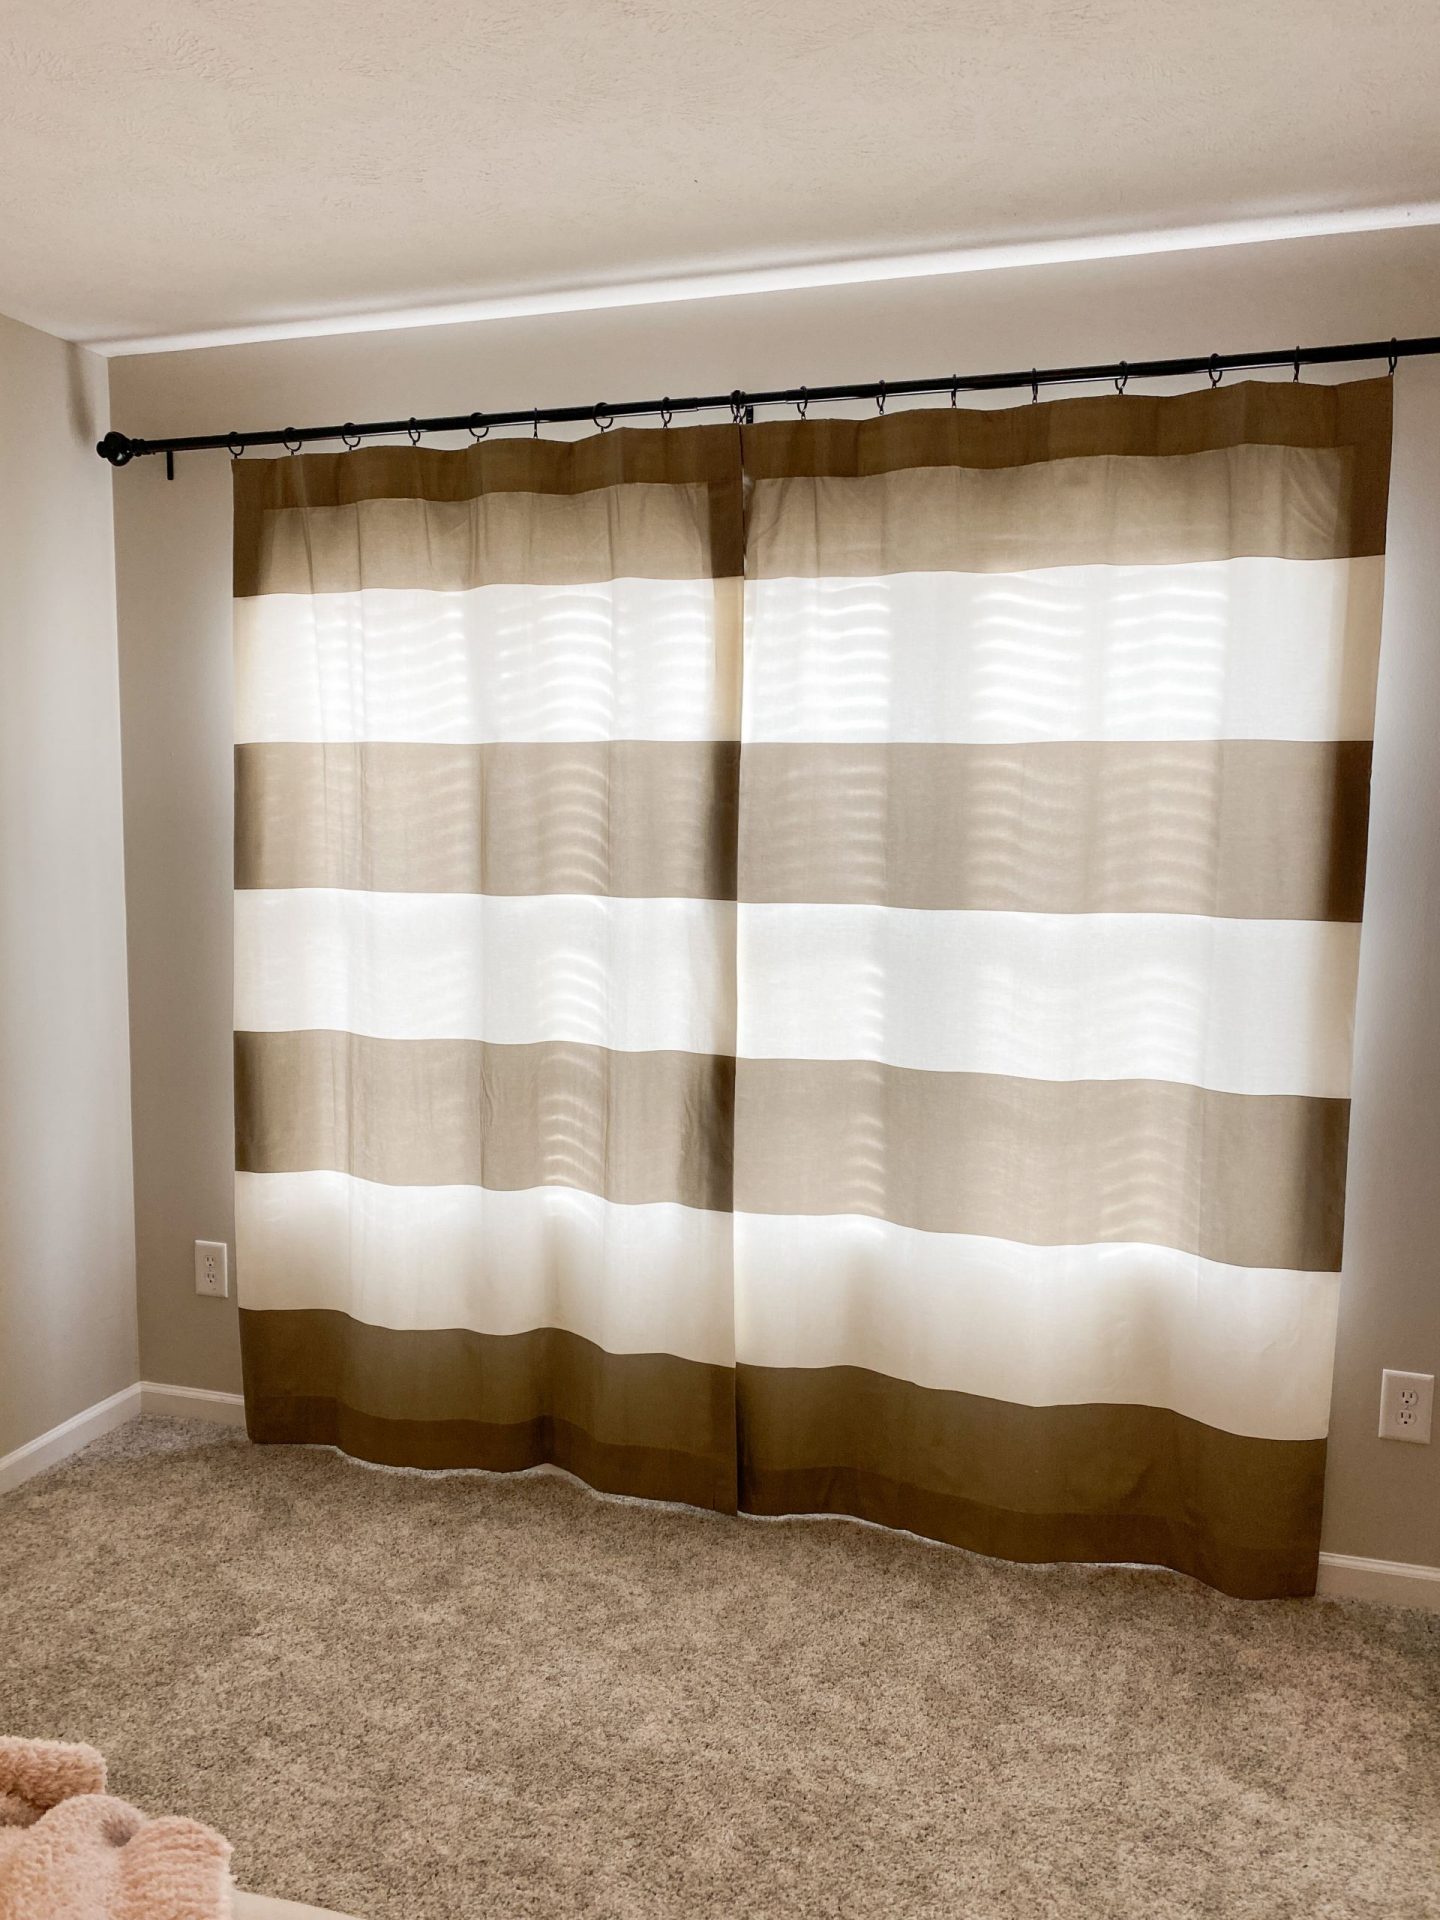 Bedroom curtains